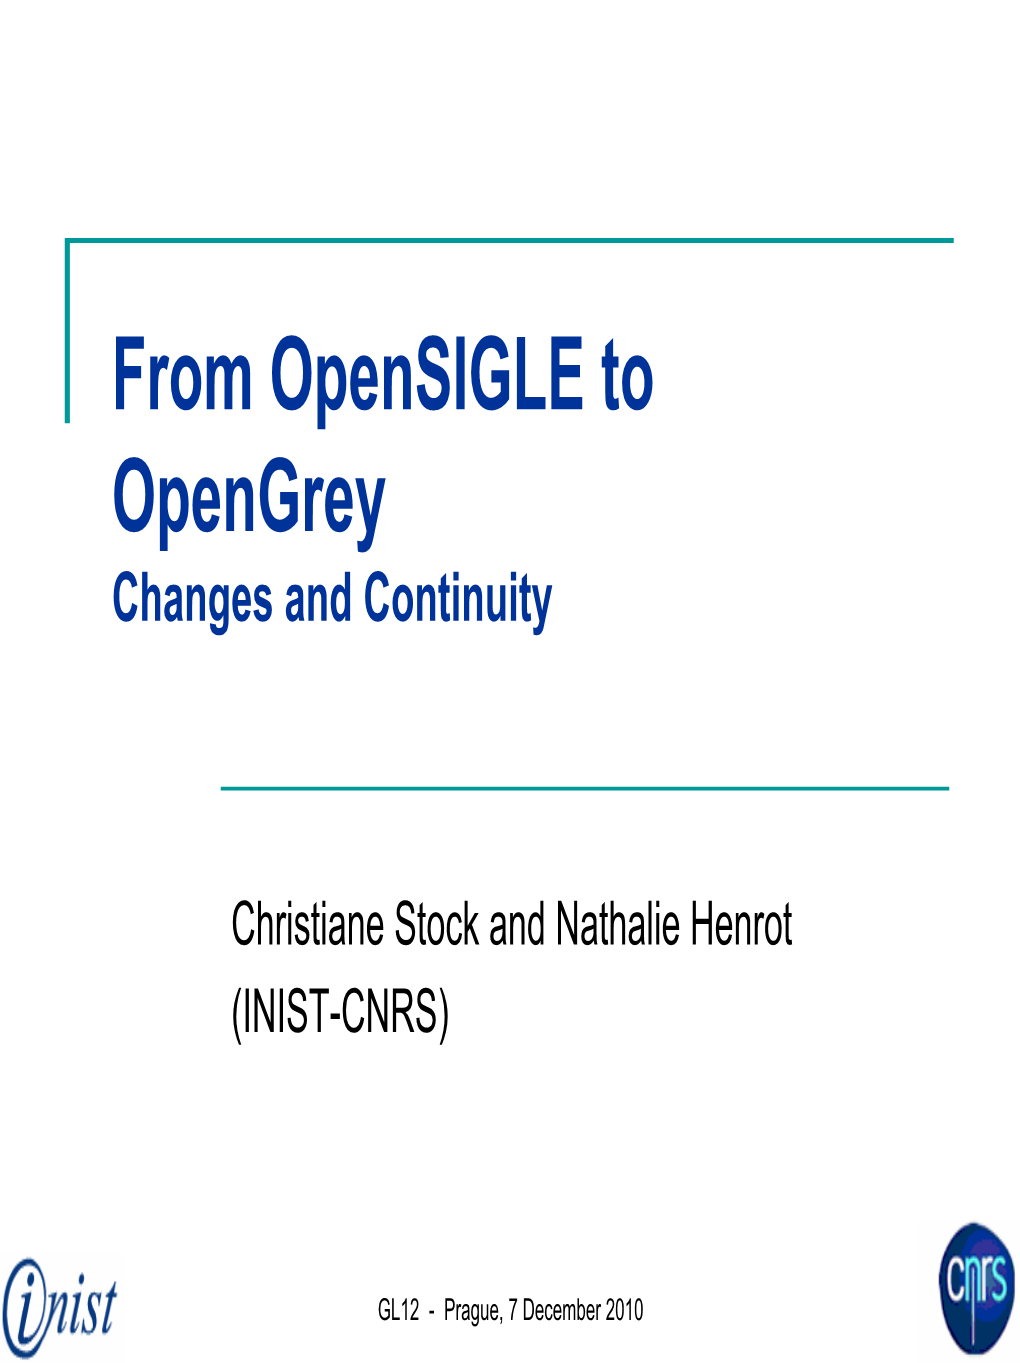 Opensigle – the Right Metadata in the Right Place